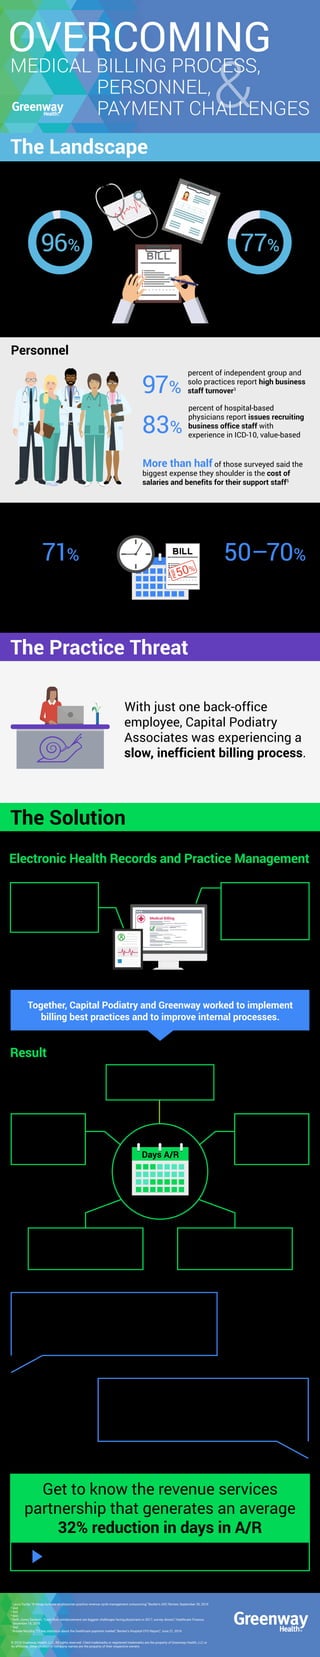 &
The Solution
The Practice Threat
Process
Electronic Health Records and Practice Management
Result
77%96%
of practice leaders report
inefficient billing processes1
of physicians feel they need
to find additional direct
patient care time that is
currently taken up by
business office-related
With just one back-office
employee, Capital Podiatry
Associates was experiencing a
slow, inefficient billing process.
97%
percent of independent group and
solo practices report high business
staff turnover3
71%
of respondents described
"moderate" to "very severe
pain" in waiting for payment
for medical services6
58% 95%
decrease in
outstanding A/R
clean claims
ratio achieved
13 Average days in
A/R reduced to 13
50–70%
Amount practices with
high-deductible plan
patients expect to collect
after a visit7
83%
percent of hospital-based
physicians report issues recruiting
business office staff with
experience in ICD-10, value-based
More than half of those surveyed said the
biggest expense they shoulder is the cost of
salaries and benefits for their support staff5
Together, Capital Podiatry and Greenway worked to implement
billing best practices and to improve internal processes.
Together, Capital Podiatry and Greenway worked to implement
billing best practices and to improve internal processes.
Capital Podiatry
adopted Greenway
Health’s integrated
EHR and PM solution.
Full visibility into revenue
cycle via online tools
Claims denials and other
issues more quickly
identified and addressed
“If there is an insurance issue, they notify us
about it, but they go straight to the payer. They
go ahead and file appeals or whatever needs to
be done immediately, then get with me after that
first step has already been taken care of.”
“I like having a dedicated person in each
department to reach out to. If I have a billing
question, I know who to go to. If I have a coding
question, I know who to go to.”
—Michal Levinsky, Practice
Get to know the revenue services
partnership that generates an average
32% reduction in days in A/R
© 2018 Greenway Health, LLC. All rights reserved. Cited trademarks or registered trademarks are the property of Greenway Health, LLC or
its affiliates. Other product or company names are the property of their respective owners.
1
Laura Dyrda, “8 things to know on physician practice revenue cycle management outsourcing,” Becker’s ASC Review, September 30, 2016
2
ibid.
3
ibid.
4
ibid.
5
Beth Jones Sanborn, “Cash flow, reimbursement are biggest challenges facing physicians in 2017, survey shows,” Healthcare Finance,
December 16, 2016
6
ibid.
7
Brooke Murphy, “11 key statistics about the healthcare payment market,” Becker’s Hospital CFO Report,” June 21, 2016
50%
PAID
Personnel
Payment
Learn more about Greenway Revenue Services.
Medical Billing
They also partnered
with Greenway
Revenue Services to
improve billing and
collections.
Days A/R
The Landscape
OVERCOMING
MEDICAL BILLING PROCESS,
PERSONNEL,
PAYMENT CHALLENGES
 